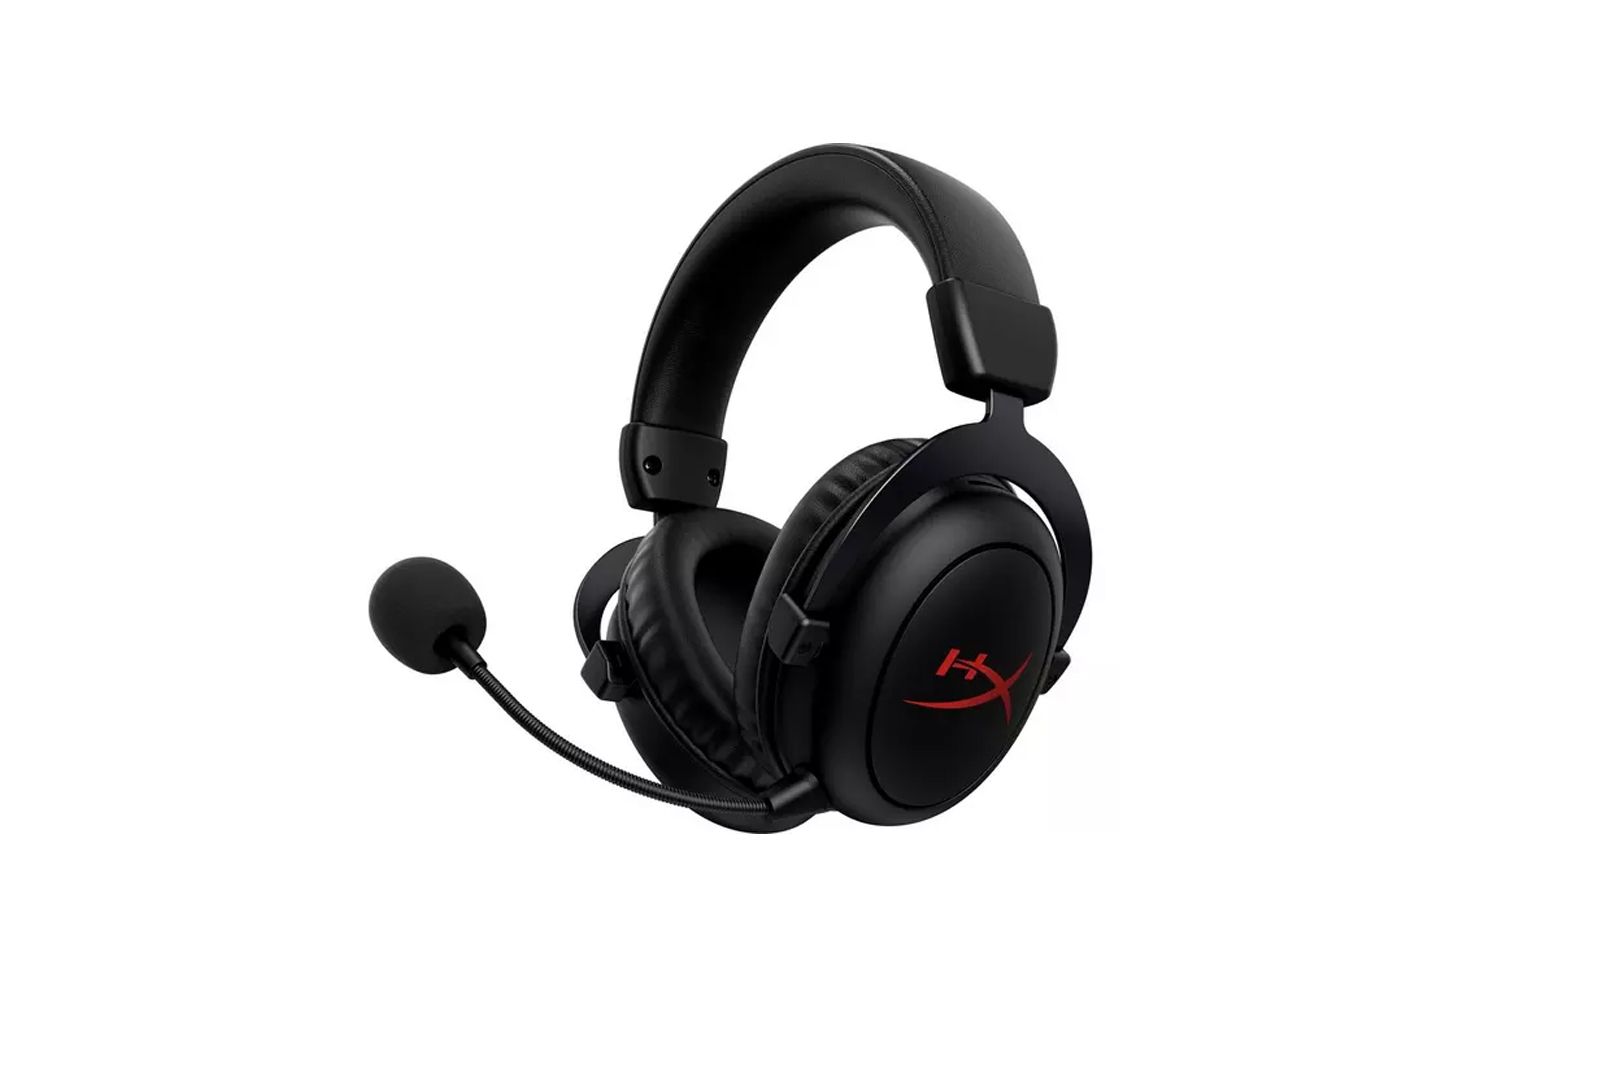 HyperX has a gaming headset for every budget - check them out here photo 4